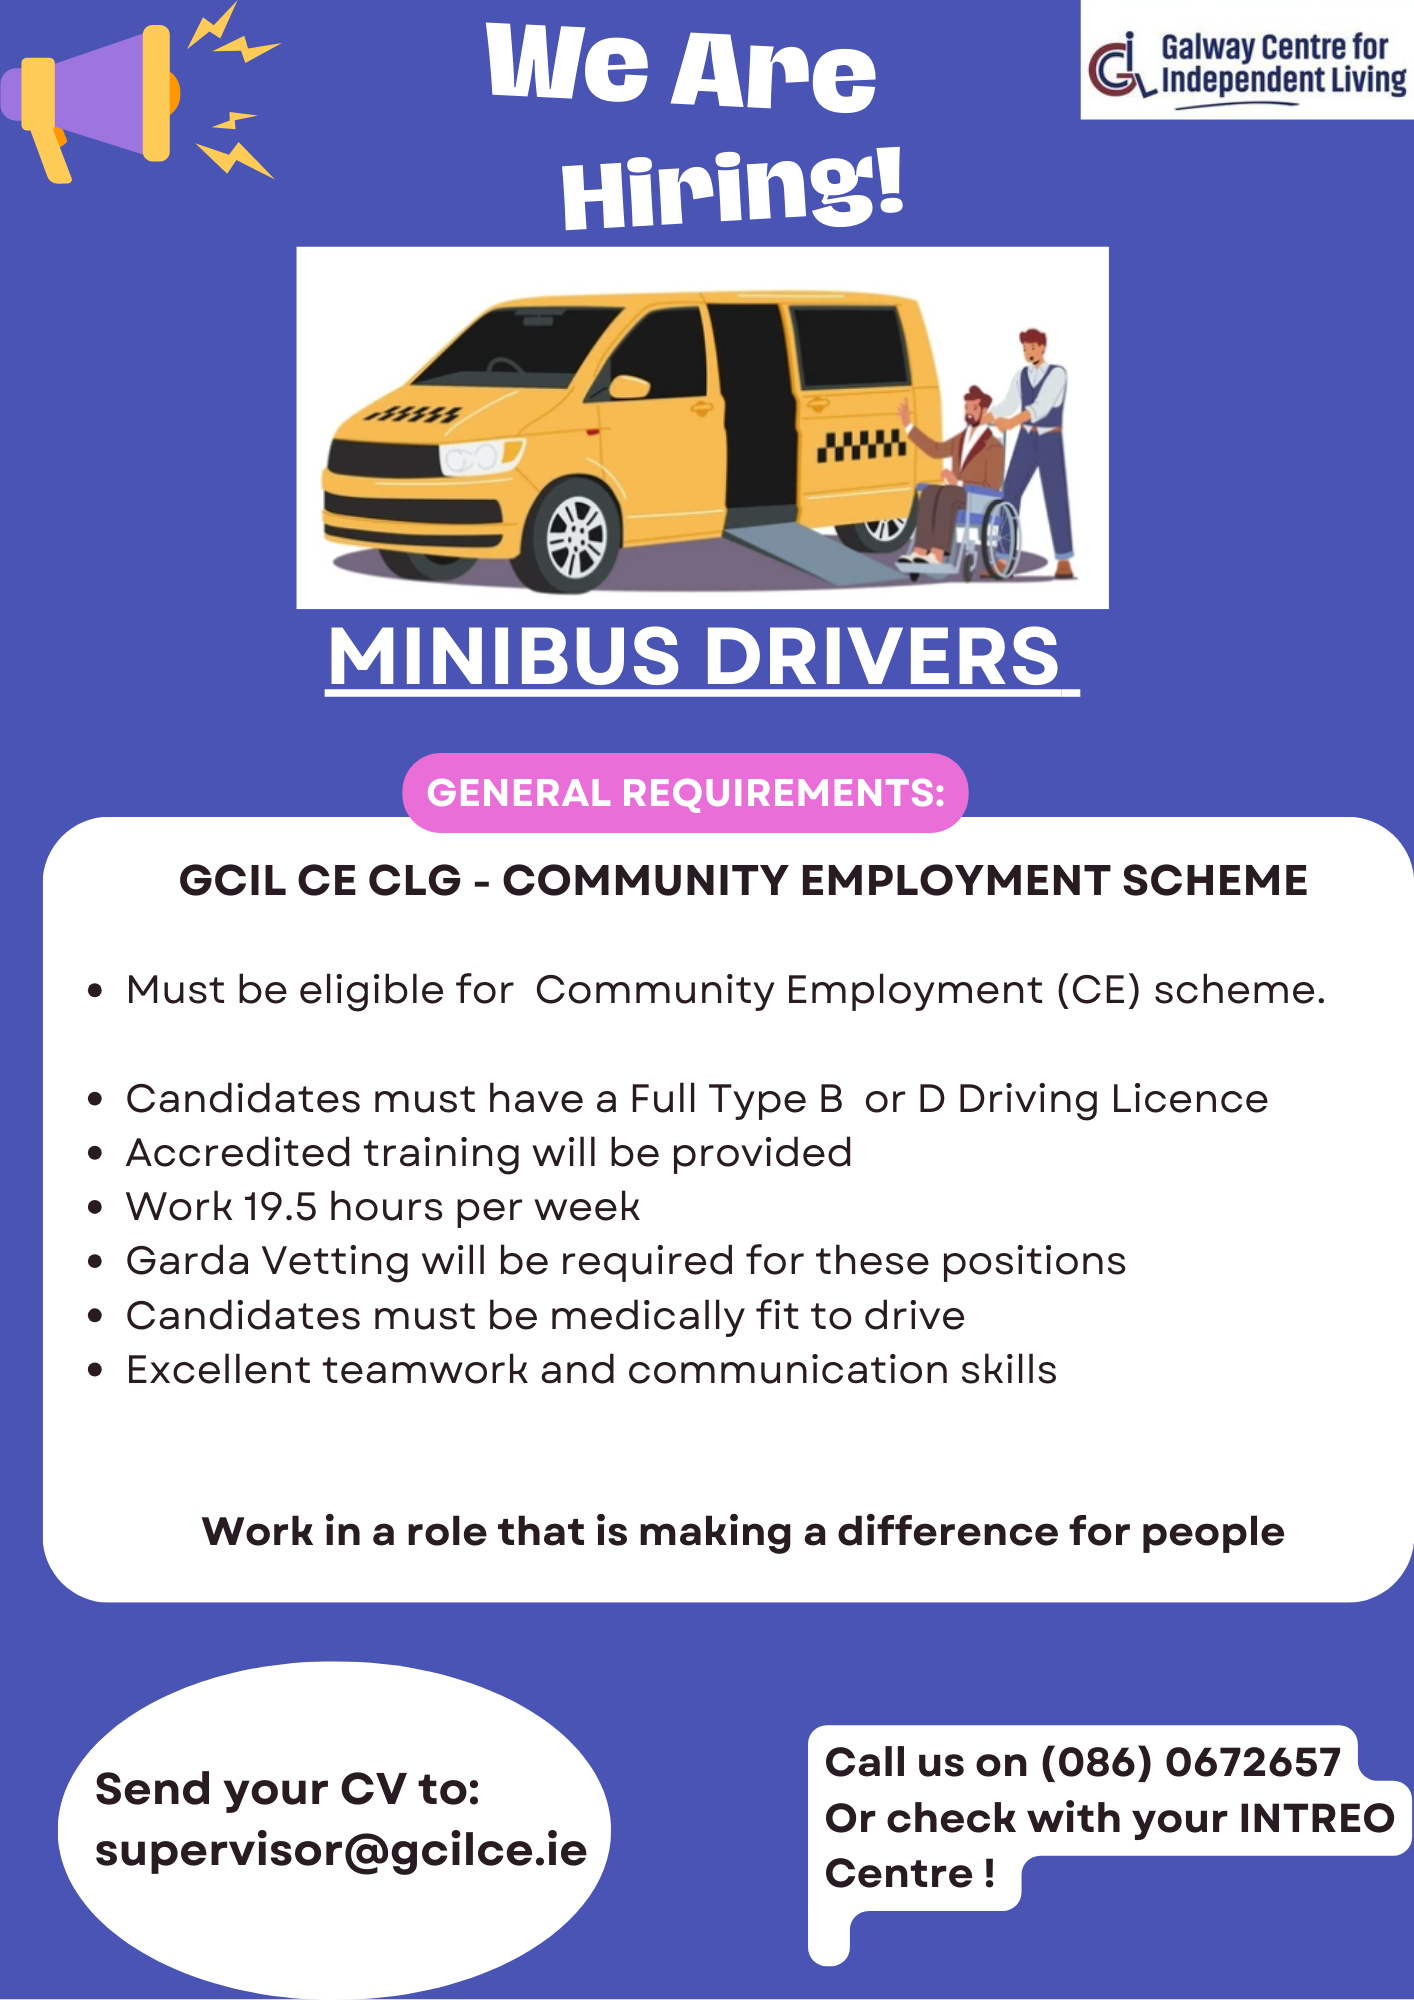 Galway CIL CE Scheme CLG are looking for Minibus Drivers